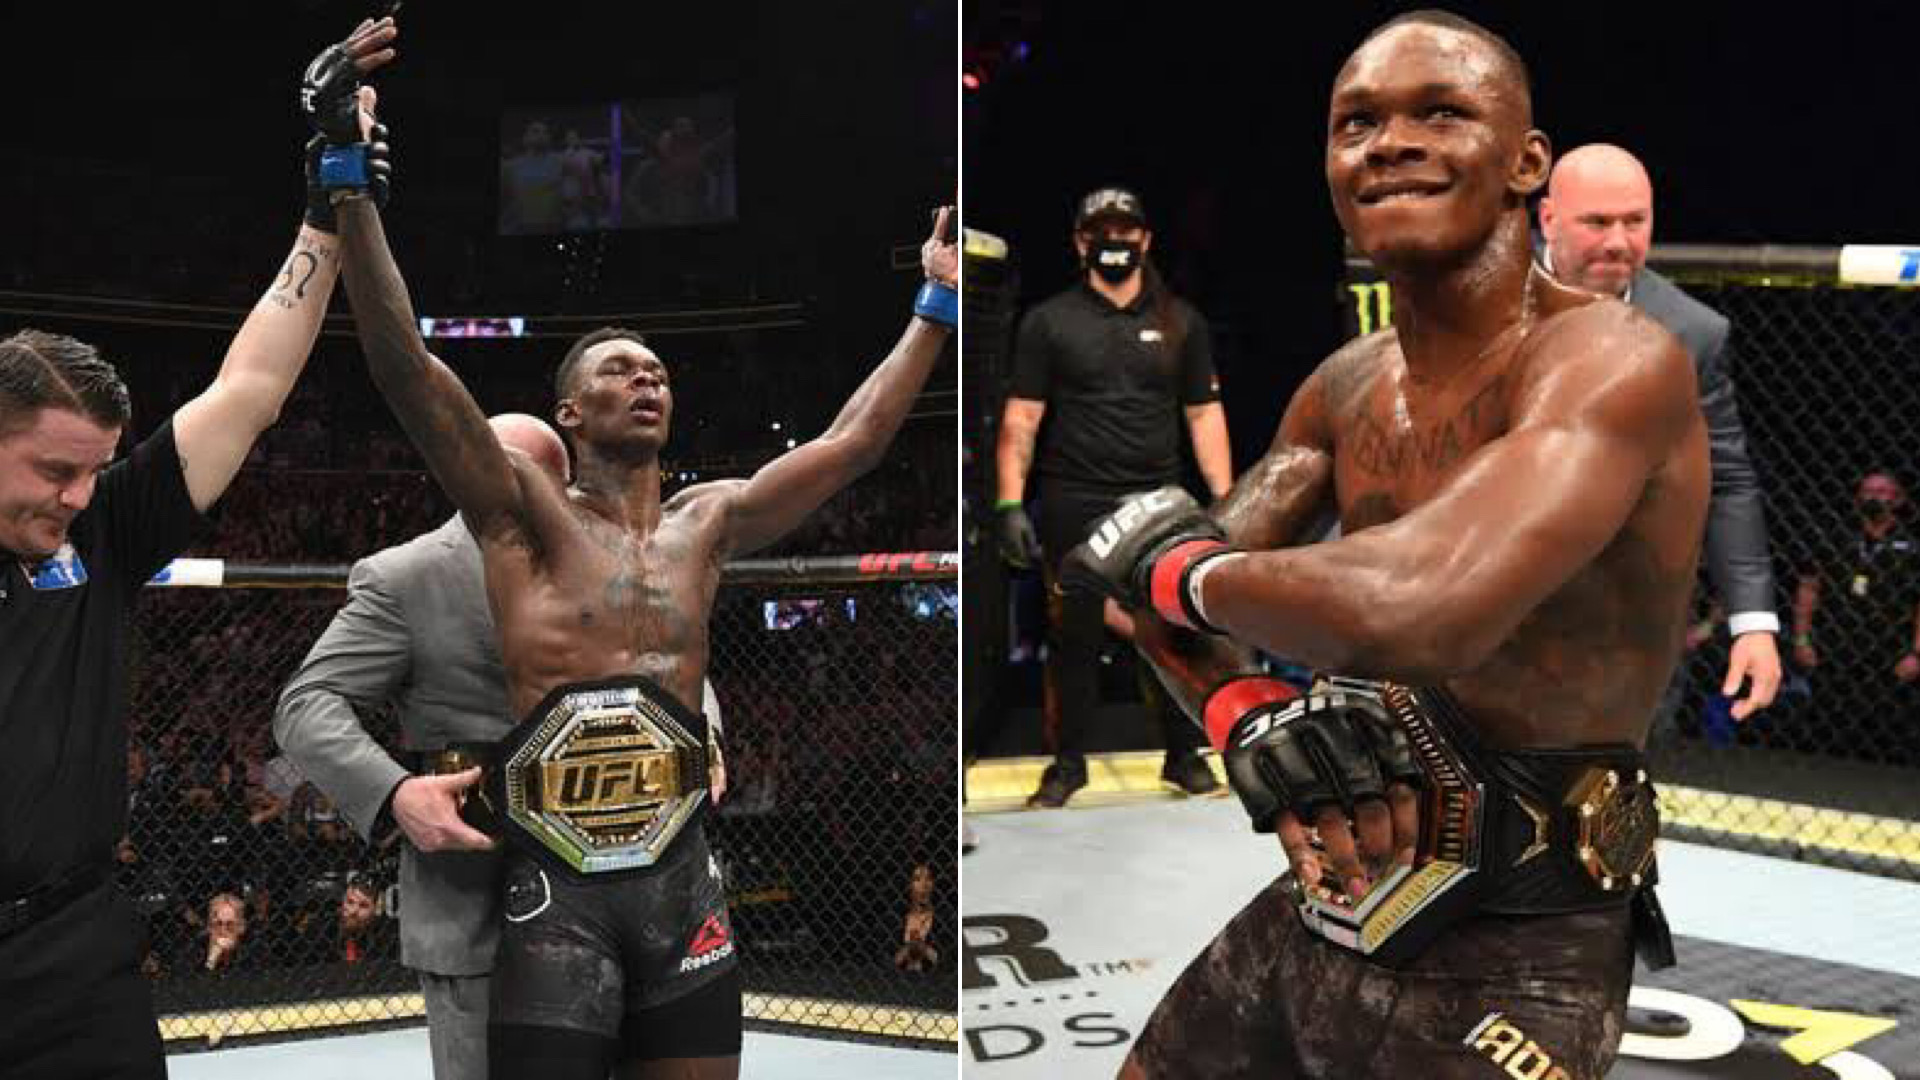 Israel Adesanya Retains UFC Title, Knocks Out Costa In Second Round